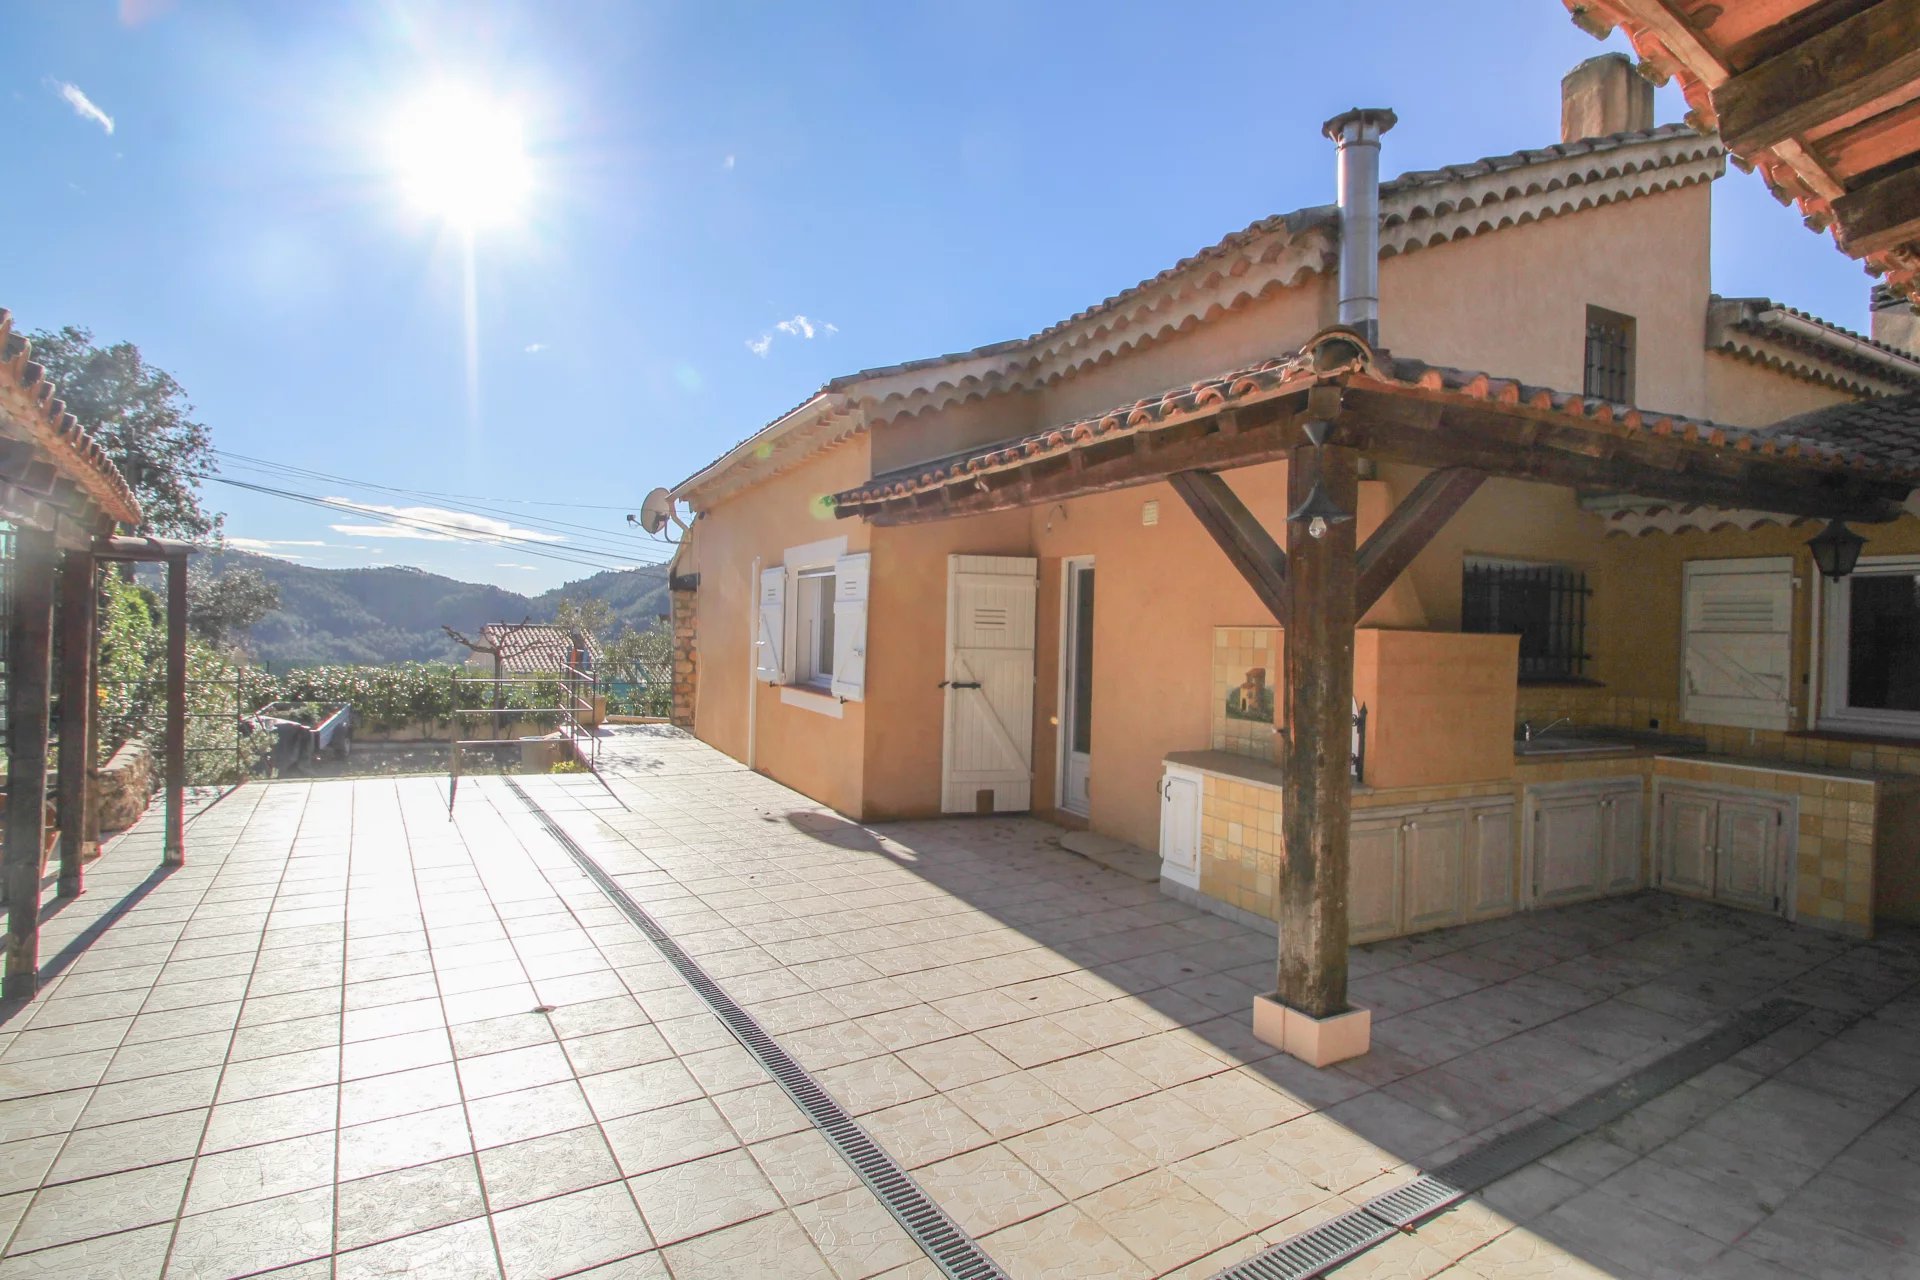 Lovely villa within walking distance from the village